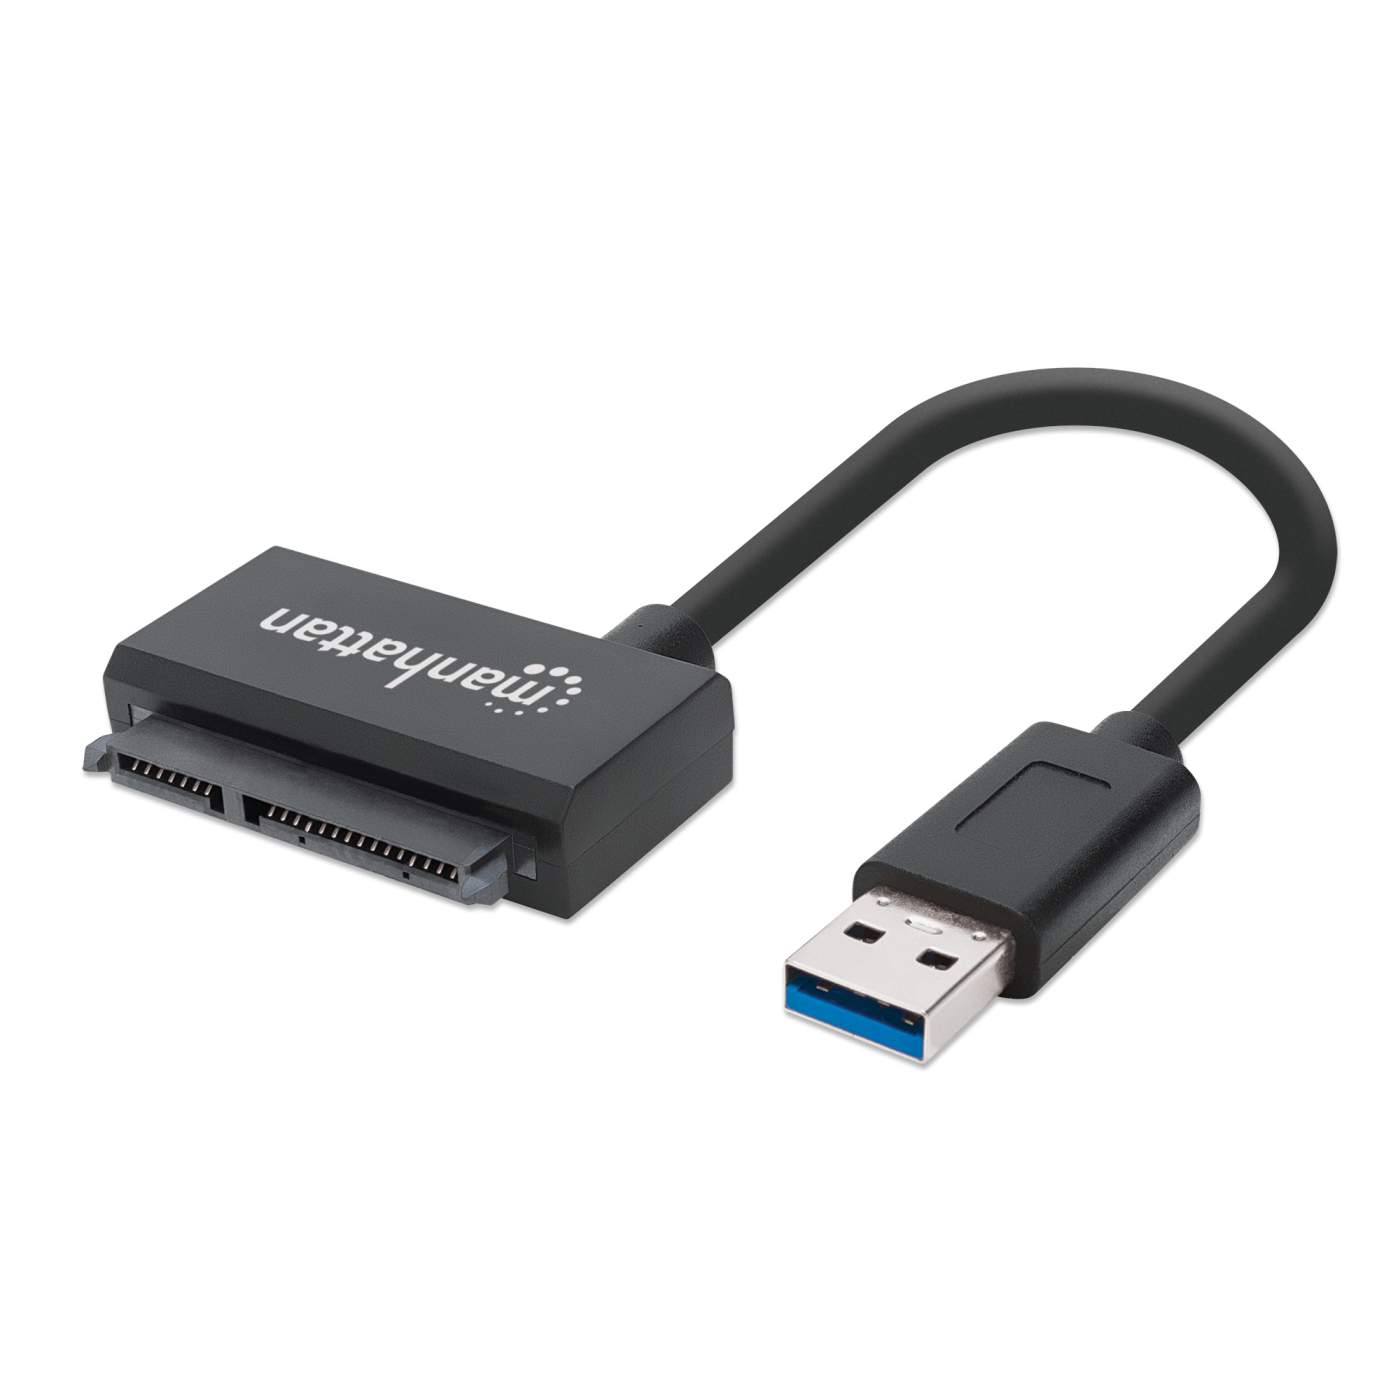 SuperSpeed USB 3.0 to SATA Adapter Image 1